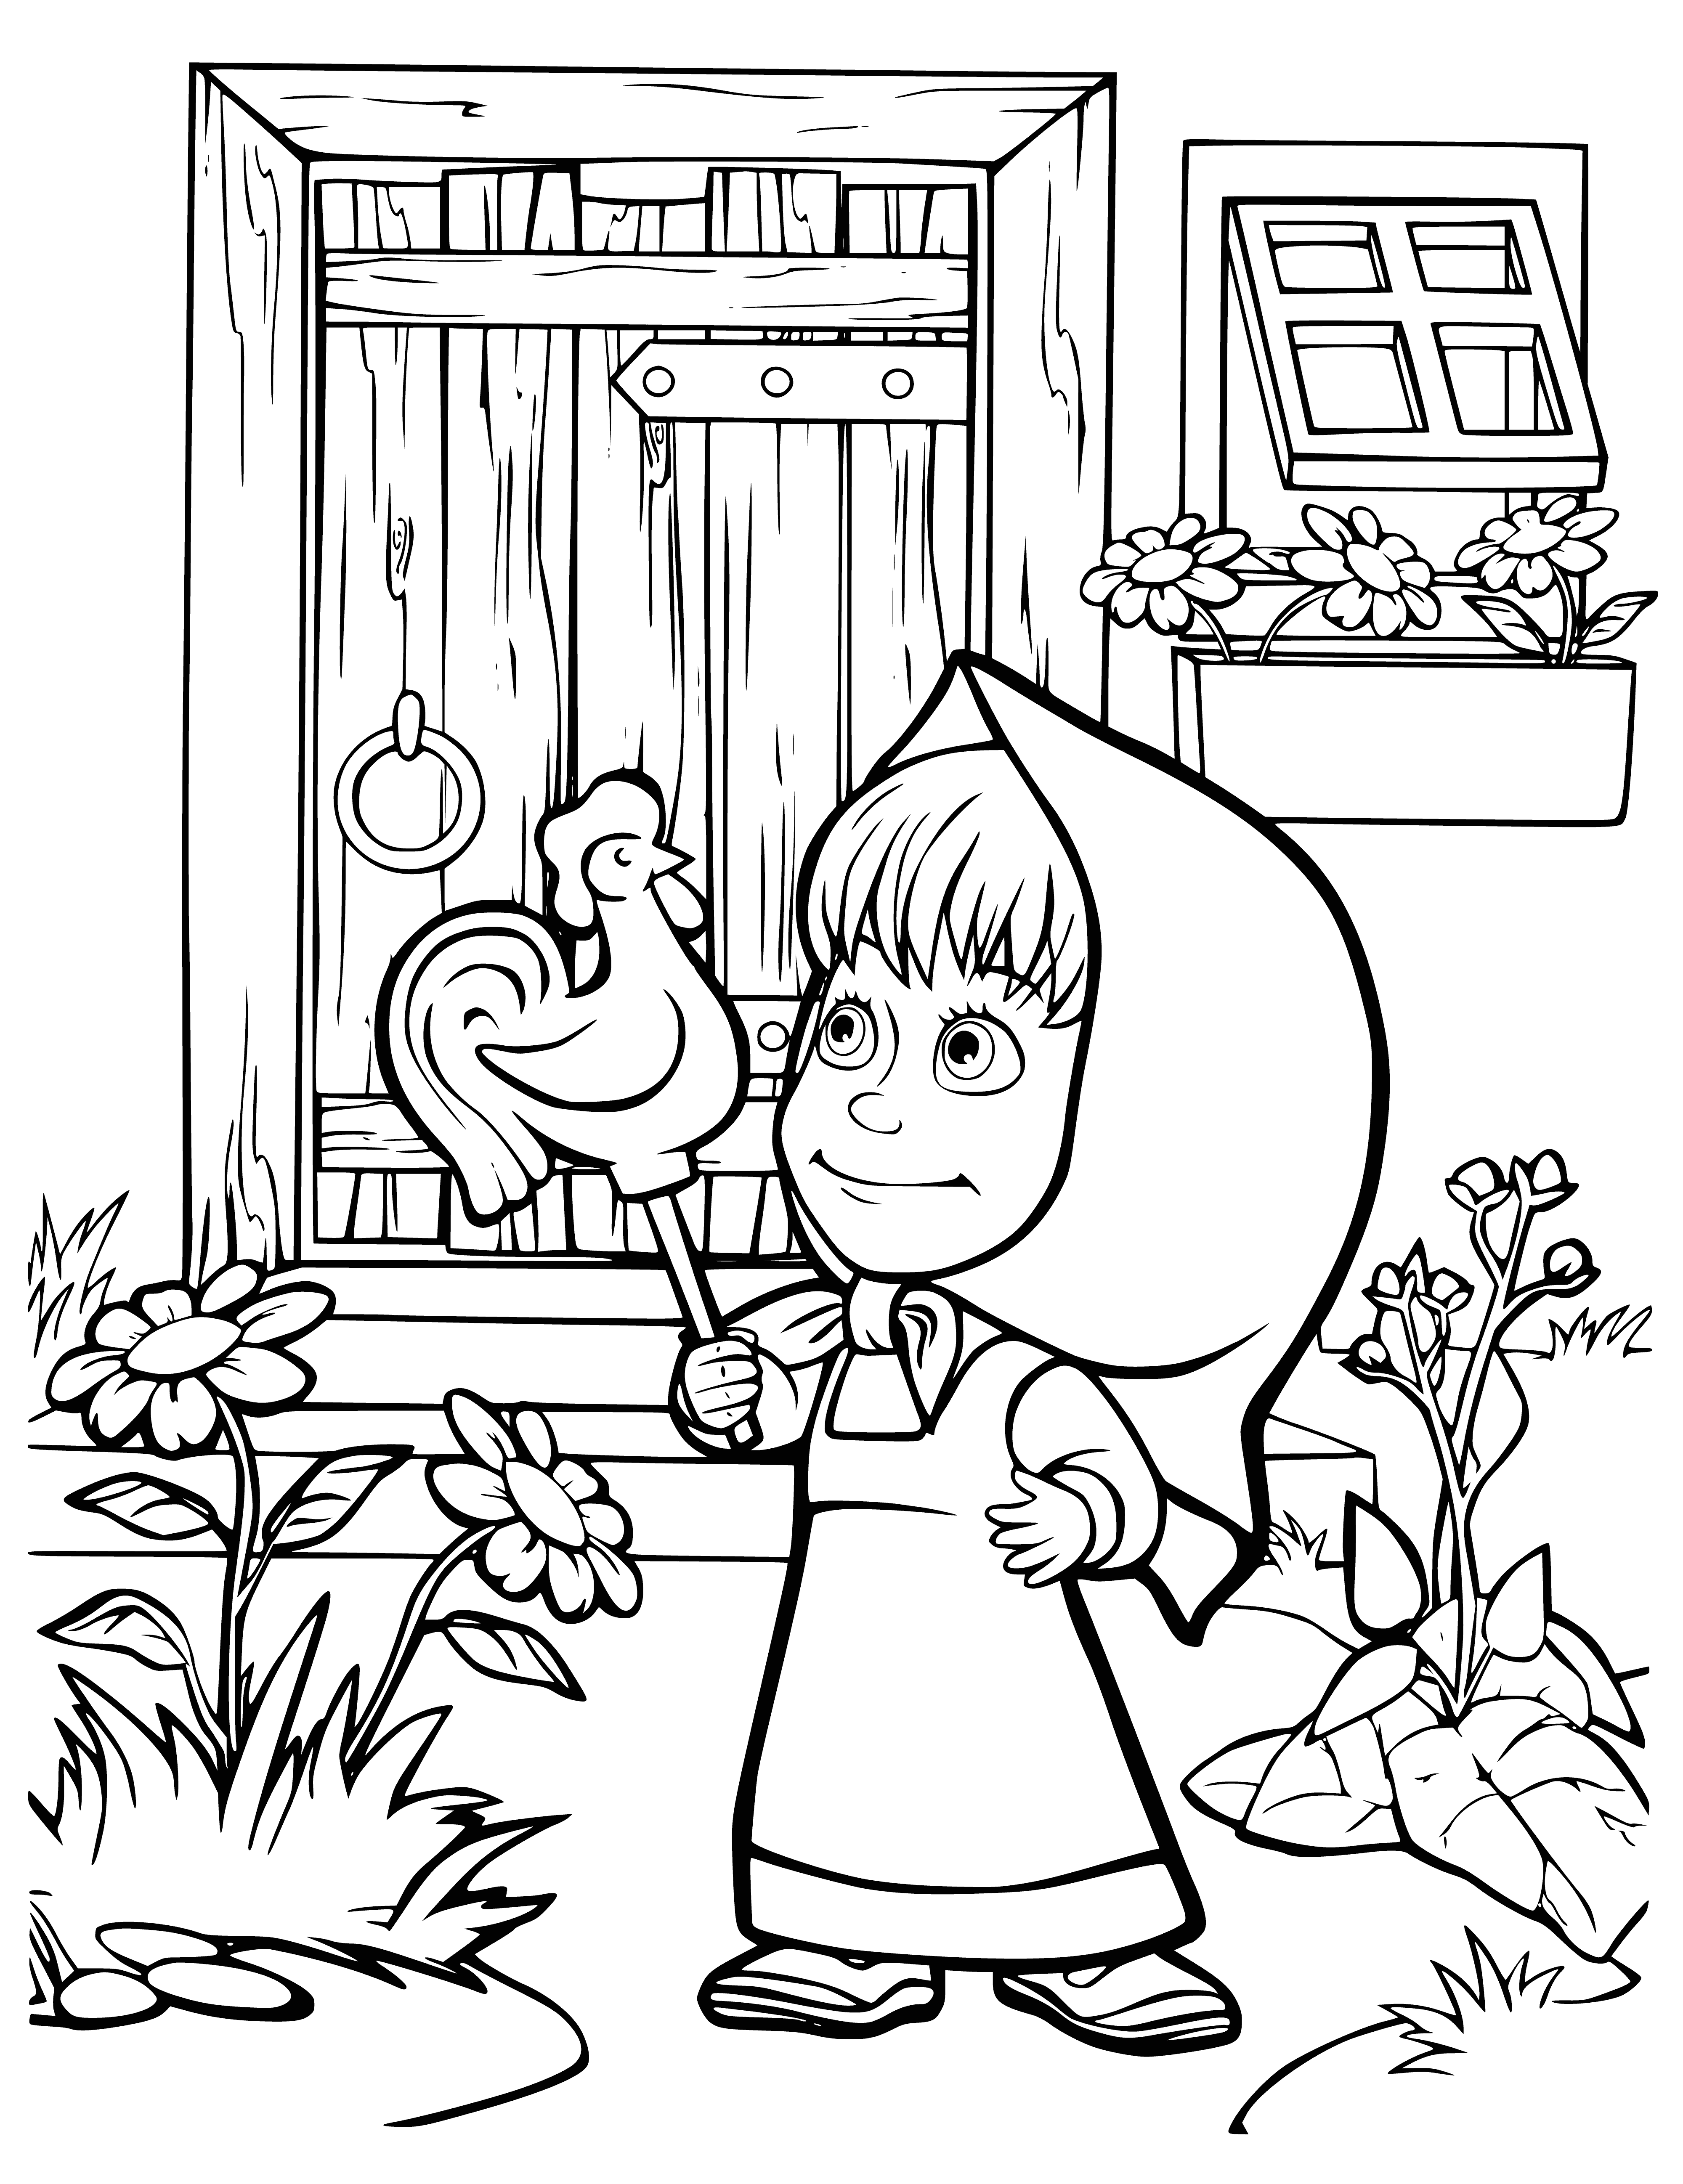 coloring page: Masha has a lollipop on a tree branch and smiles at the camera, while Bear stands sadly aside.